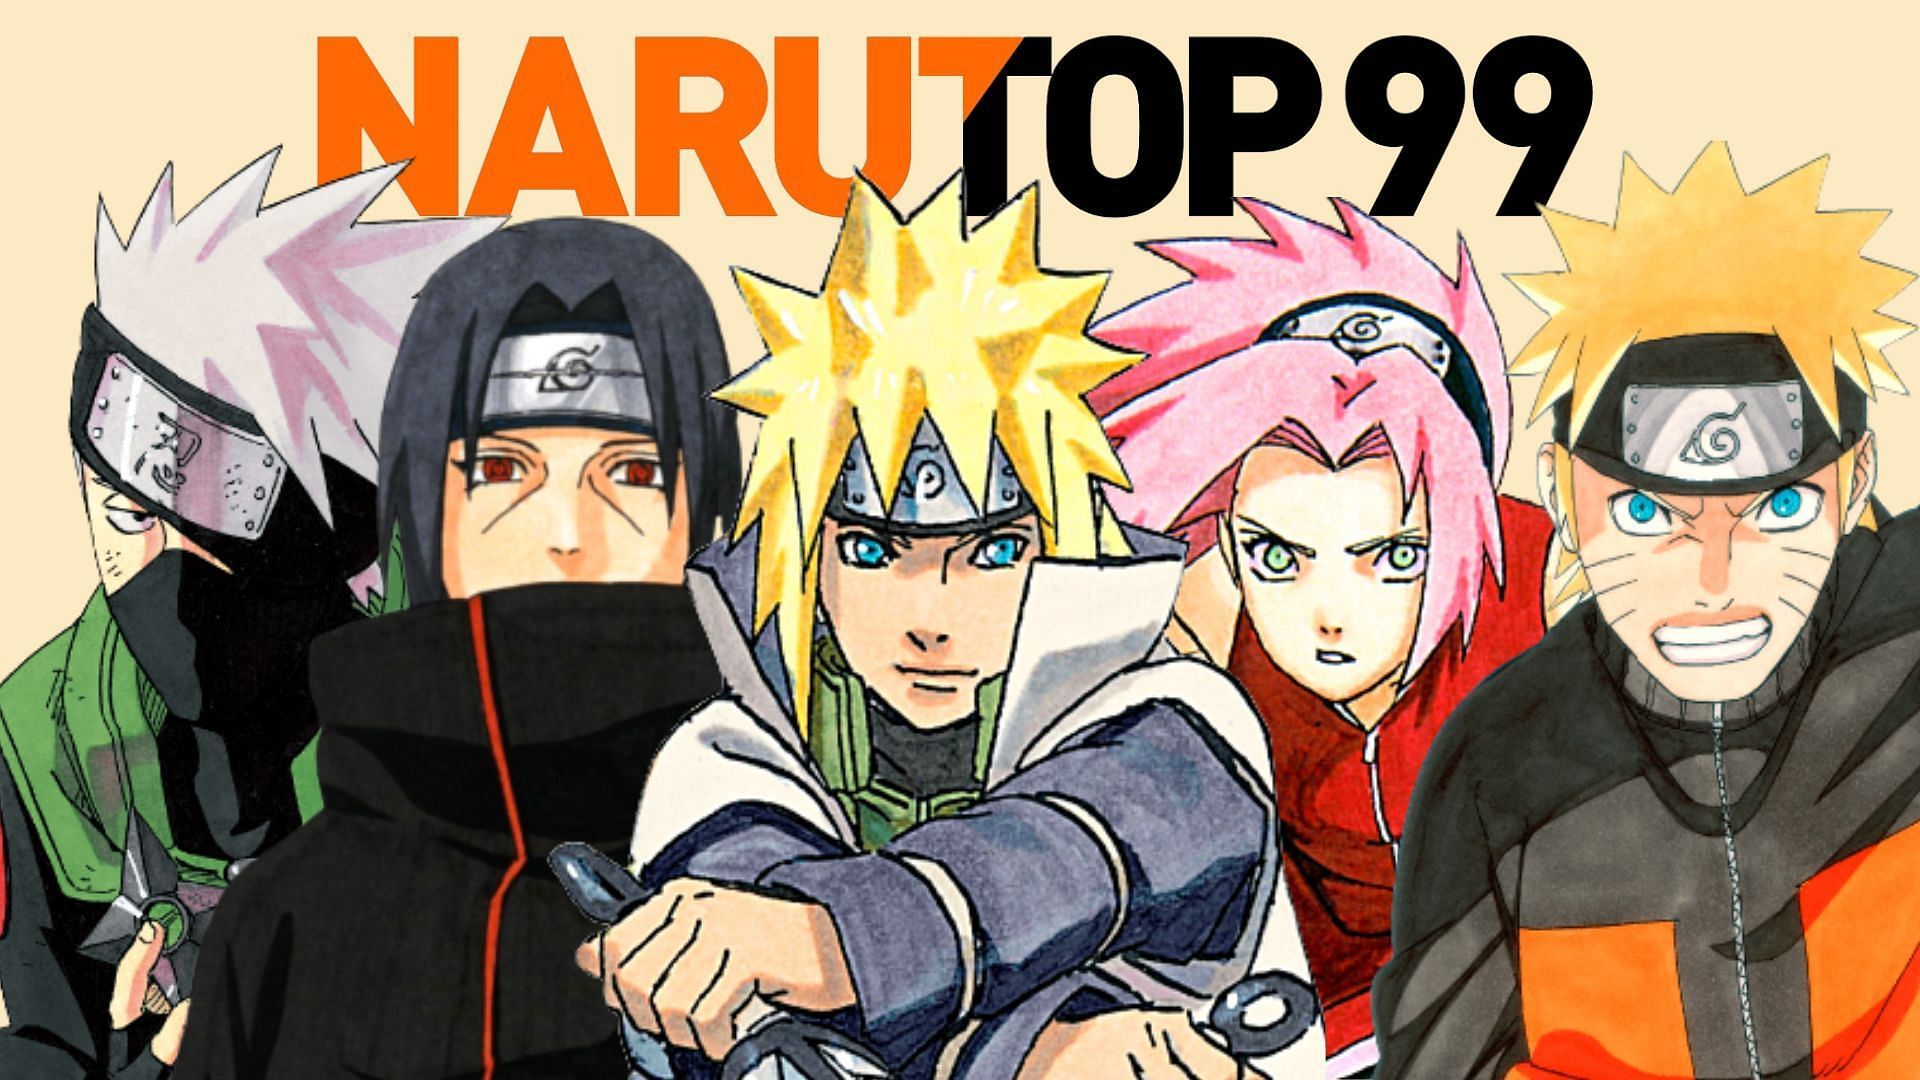 My predicted Top 20 characters on the NARUTOP99 worldwide